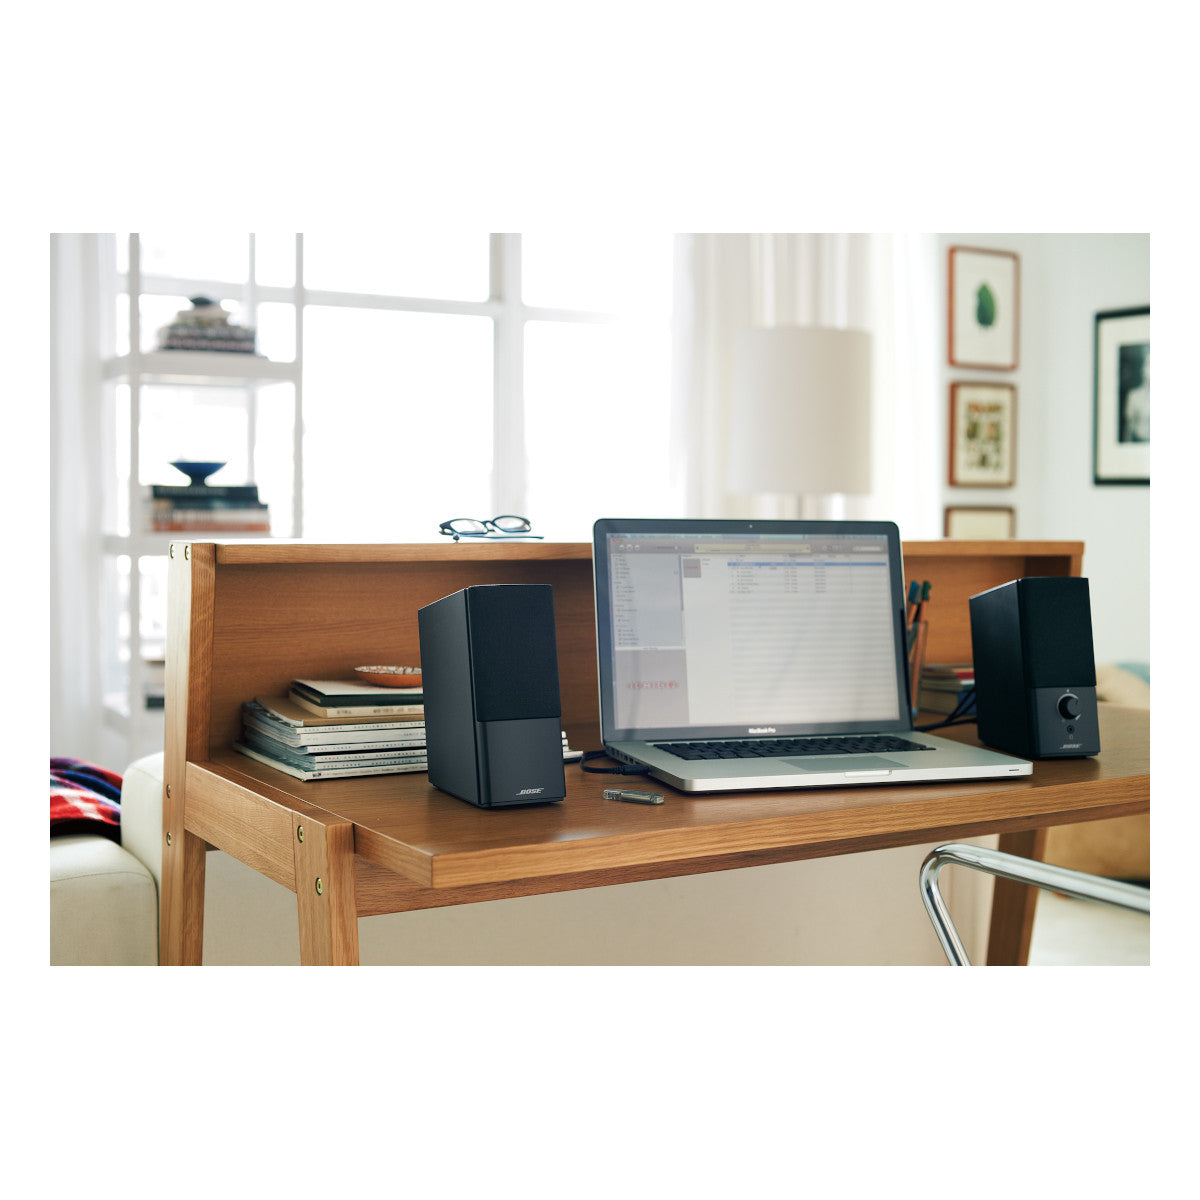 Bose Companion 2 Series III Multimedia Computer PC Wired Speakers - Black